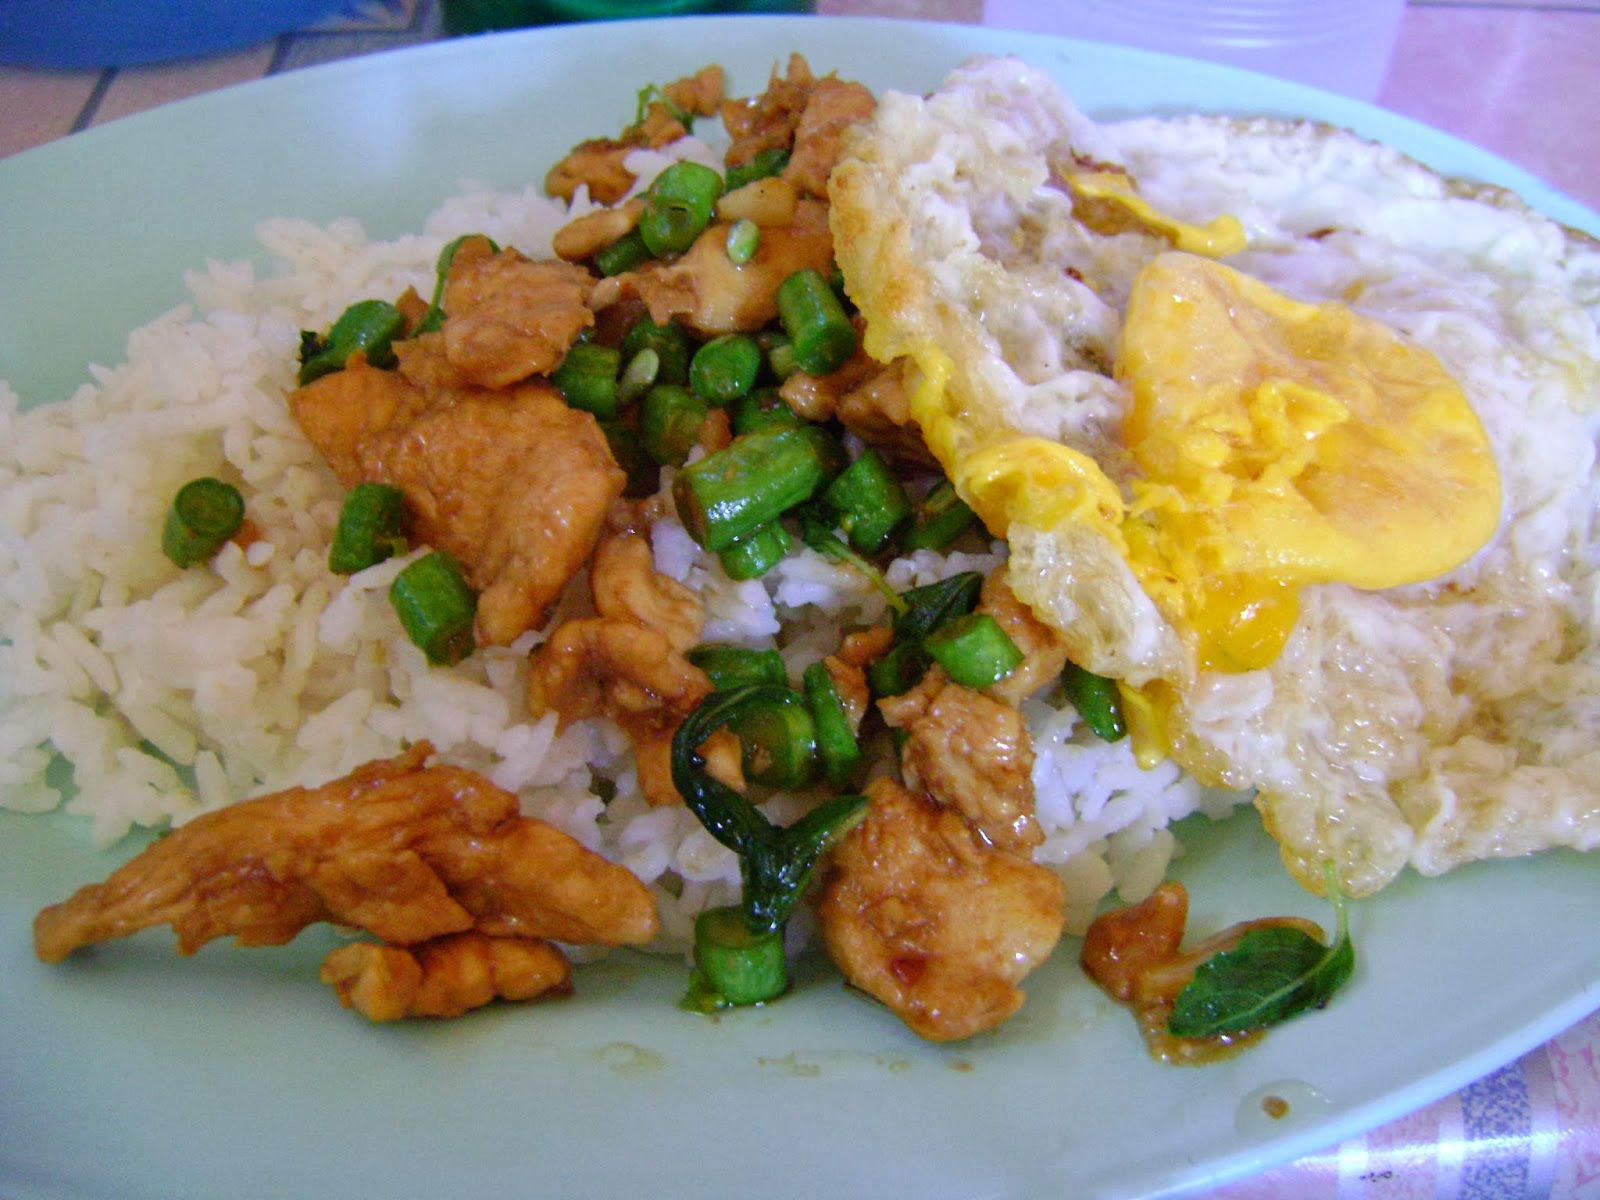 Country: Thailand. Contents: It is white rice, chicken, green beans and a fried egg.